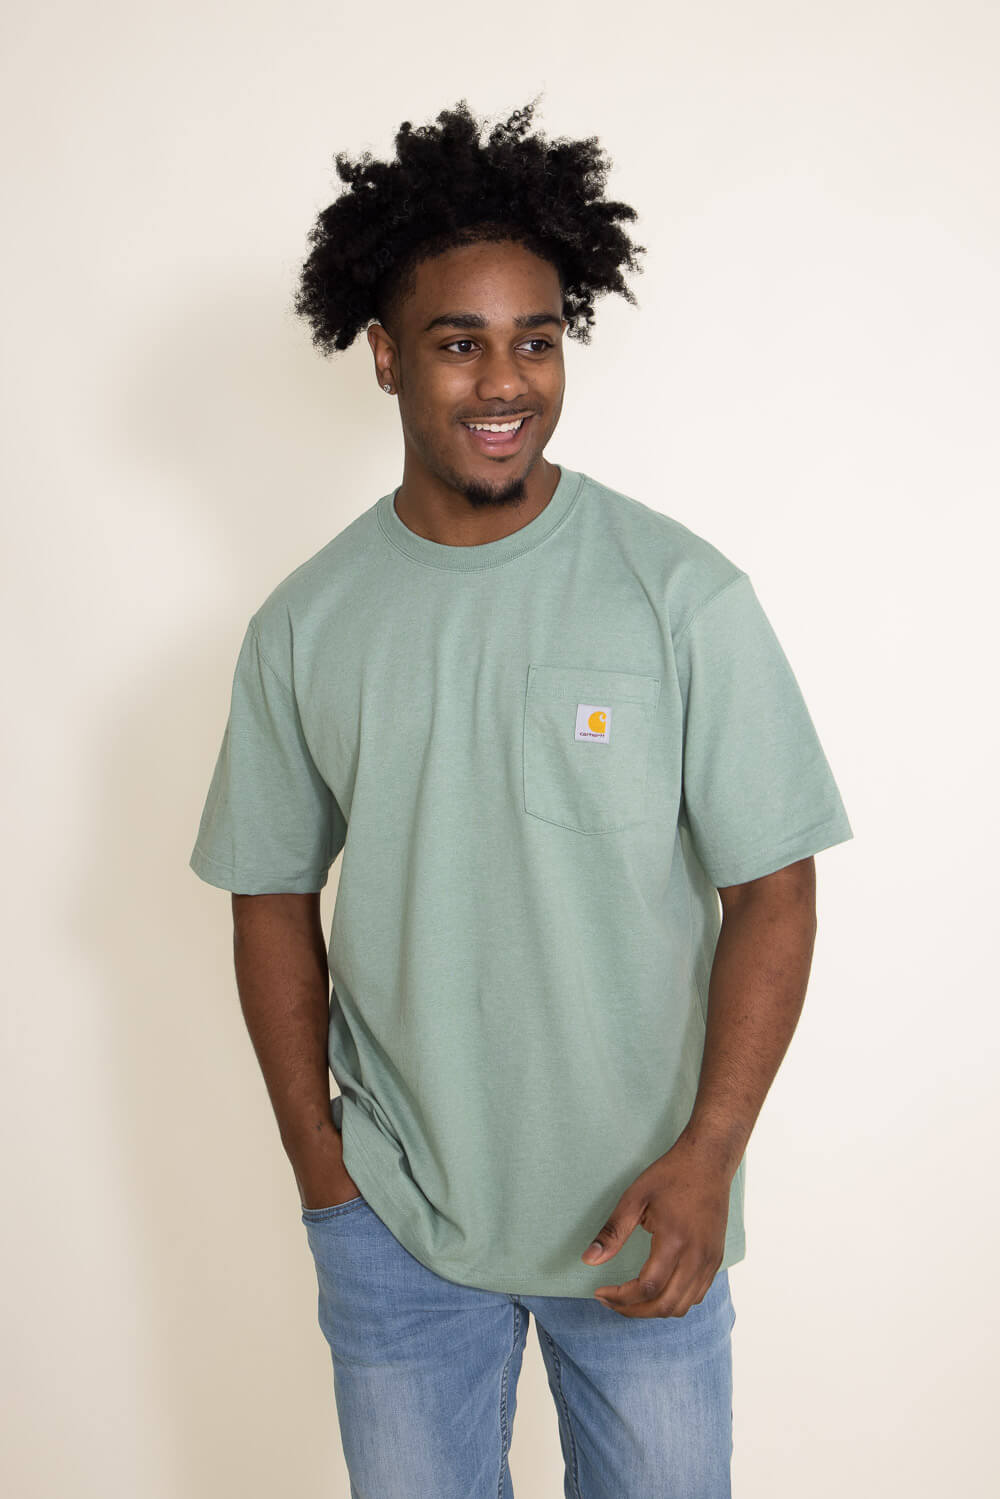 Carhartt Relaxed Heavyweight Dog Graphic T-Shirt for Men in Green